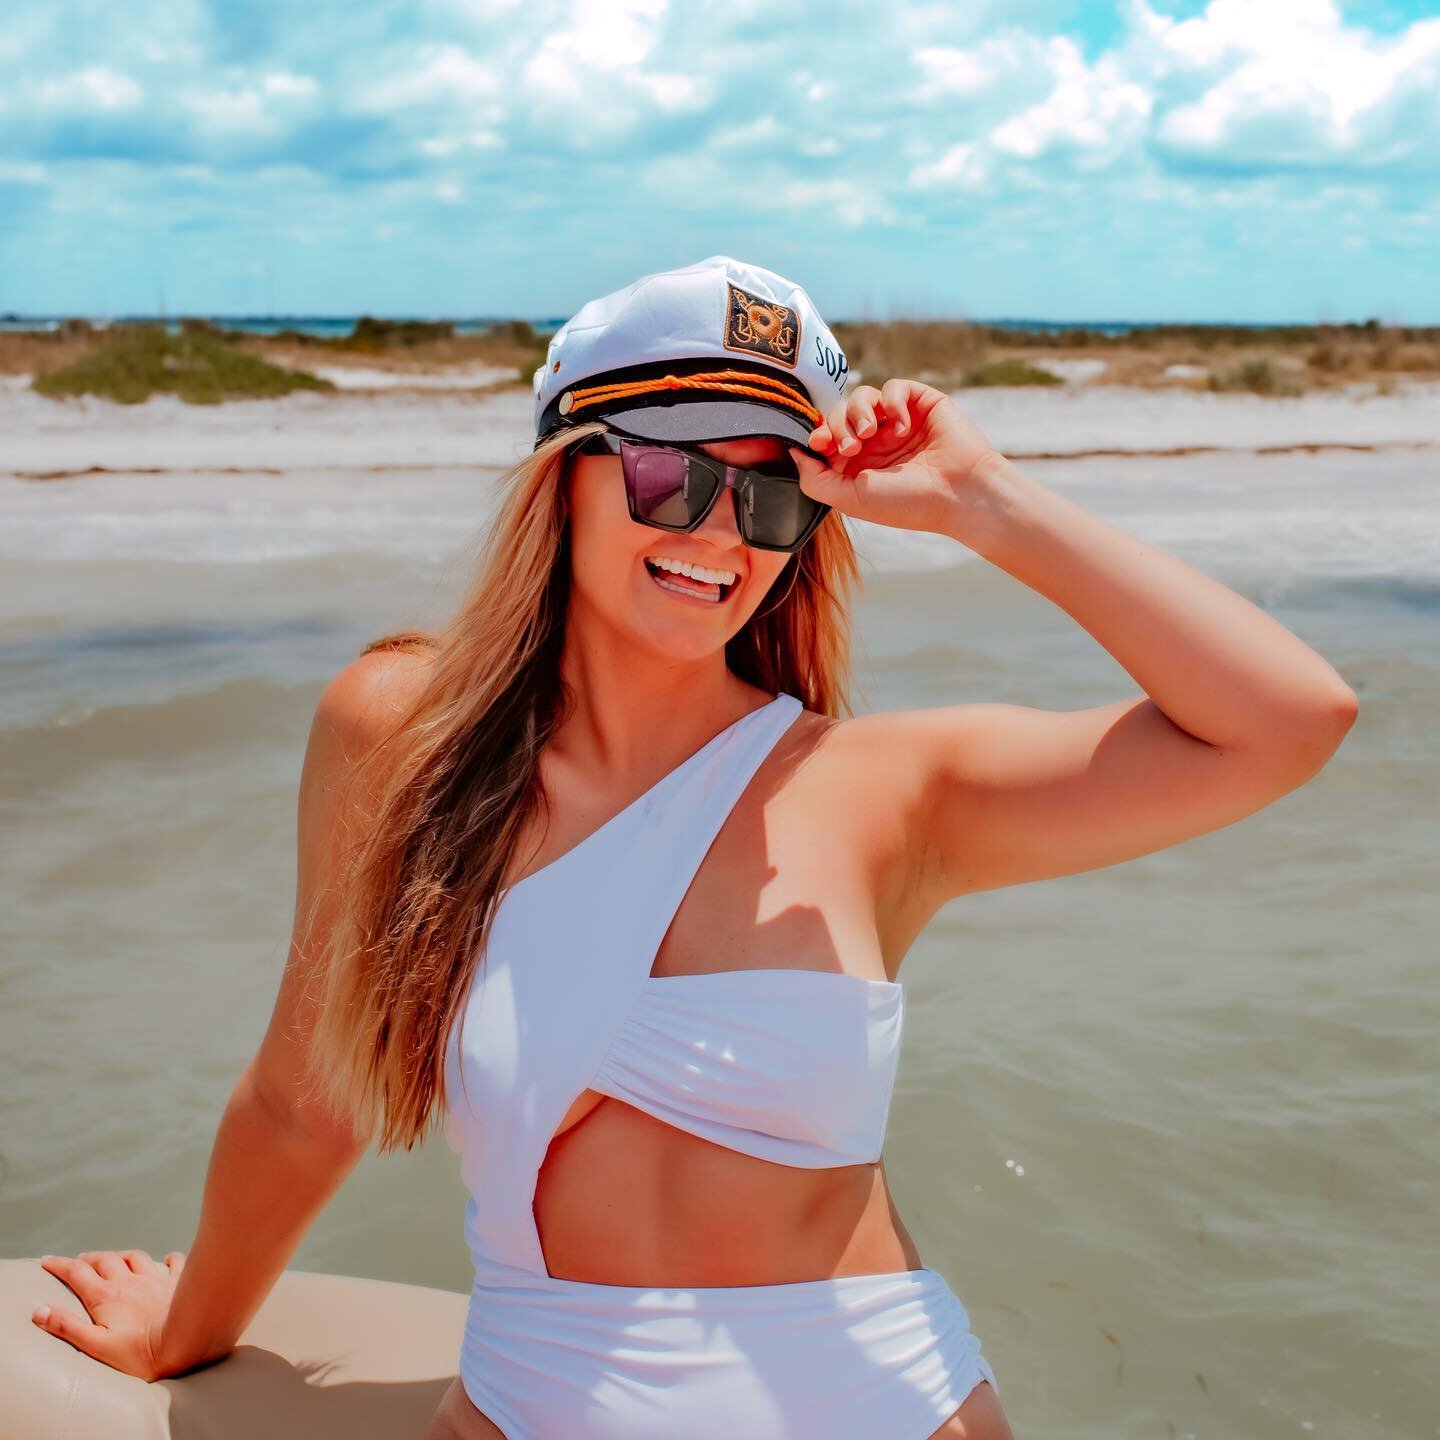 Island Hopping⚓️? Pool Party? Or Beach day? Bachelorettes on the water just hit different 🌊💙 You&rsquo;re minutes away from the water here in Tampa Bay so take advantage of it! If a boat day isn&rsquo;t in the cards&hellip;opt for a Beach Day, Tiki